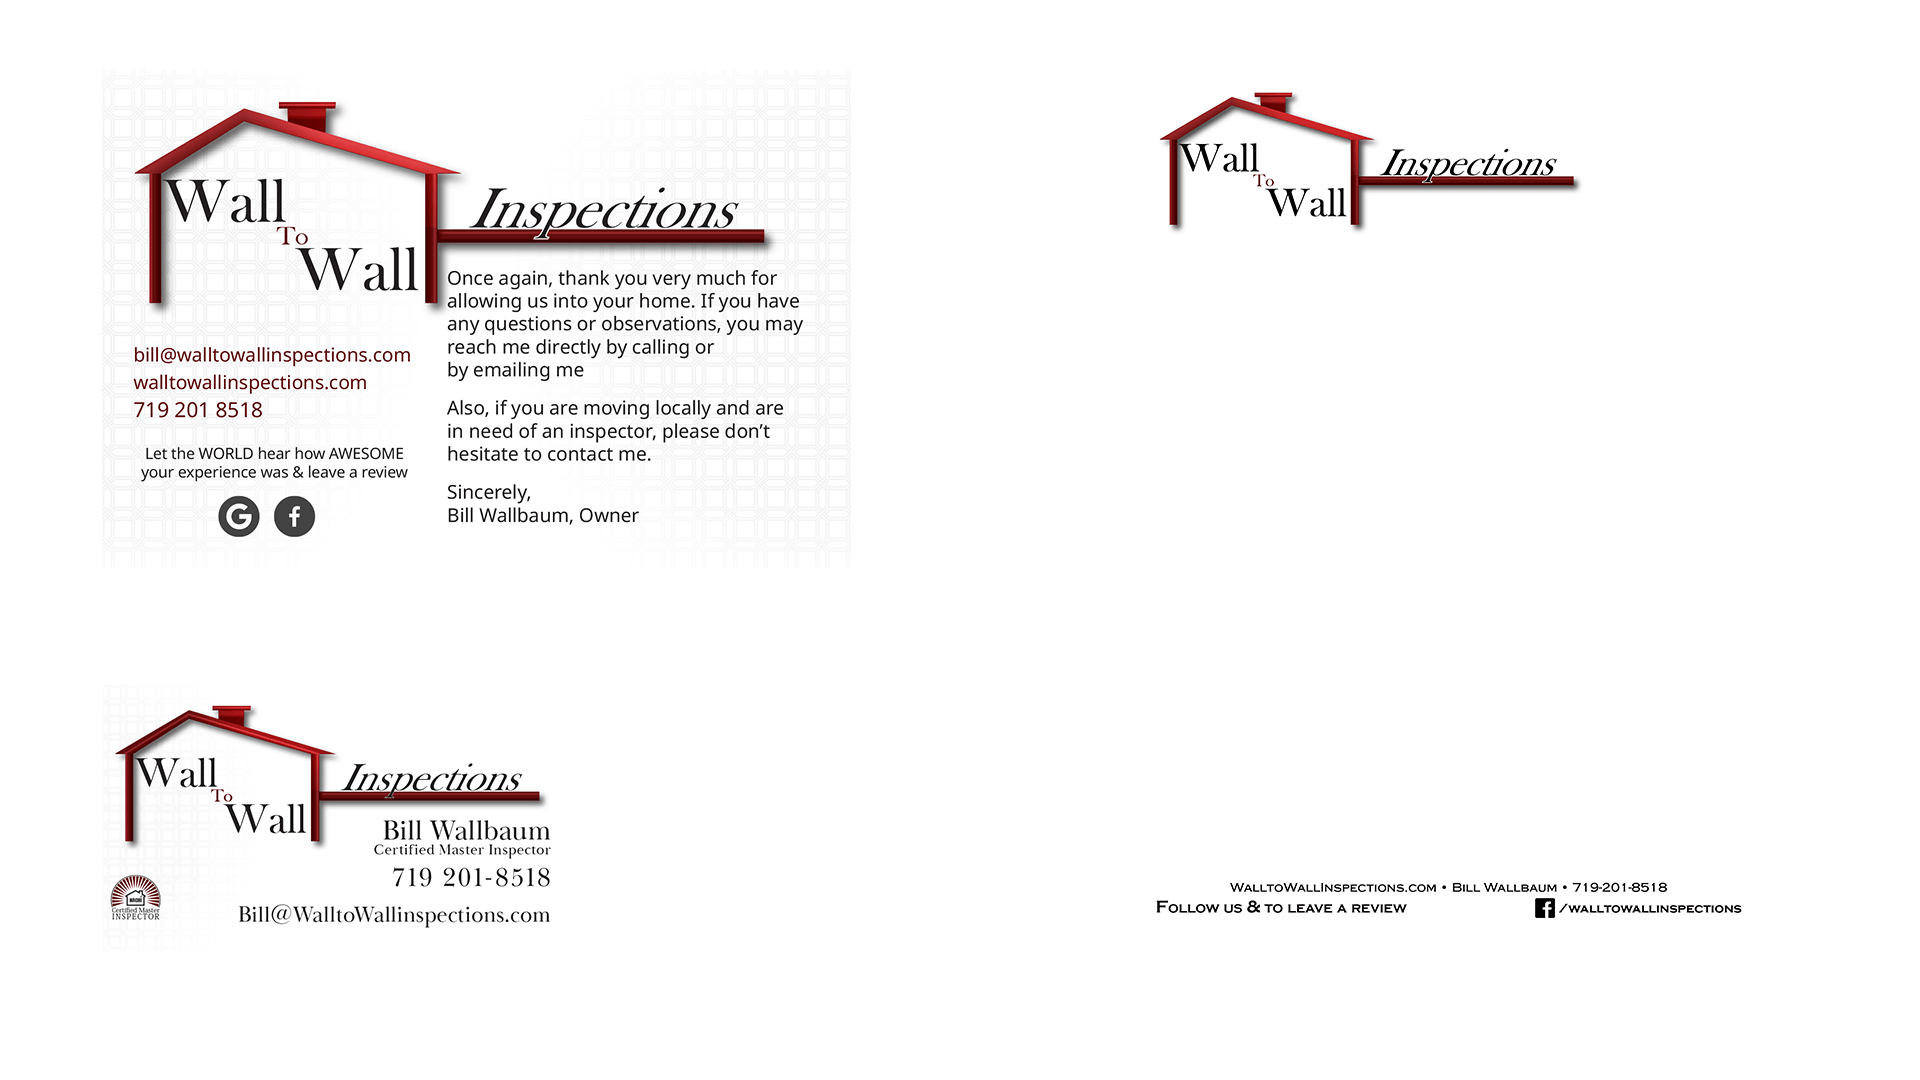 This collage showcases the Wall to Wall Inspections brand identity by demonstrating how a cohesive visual style is applied across various marketing materials, including a business card, letterhead, and postcard.